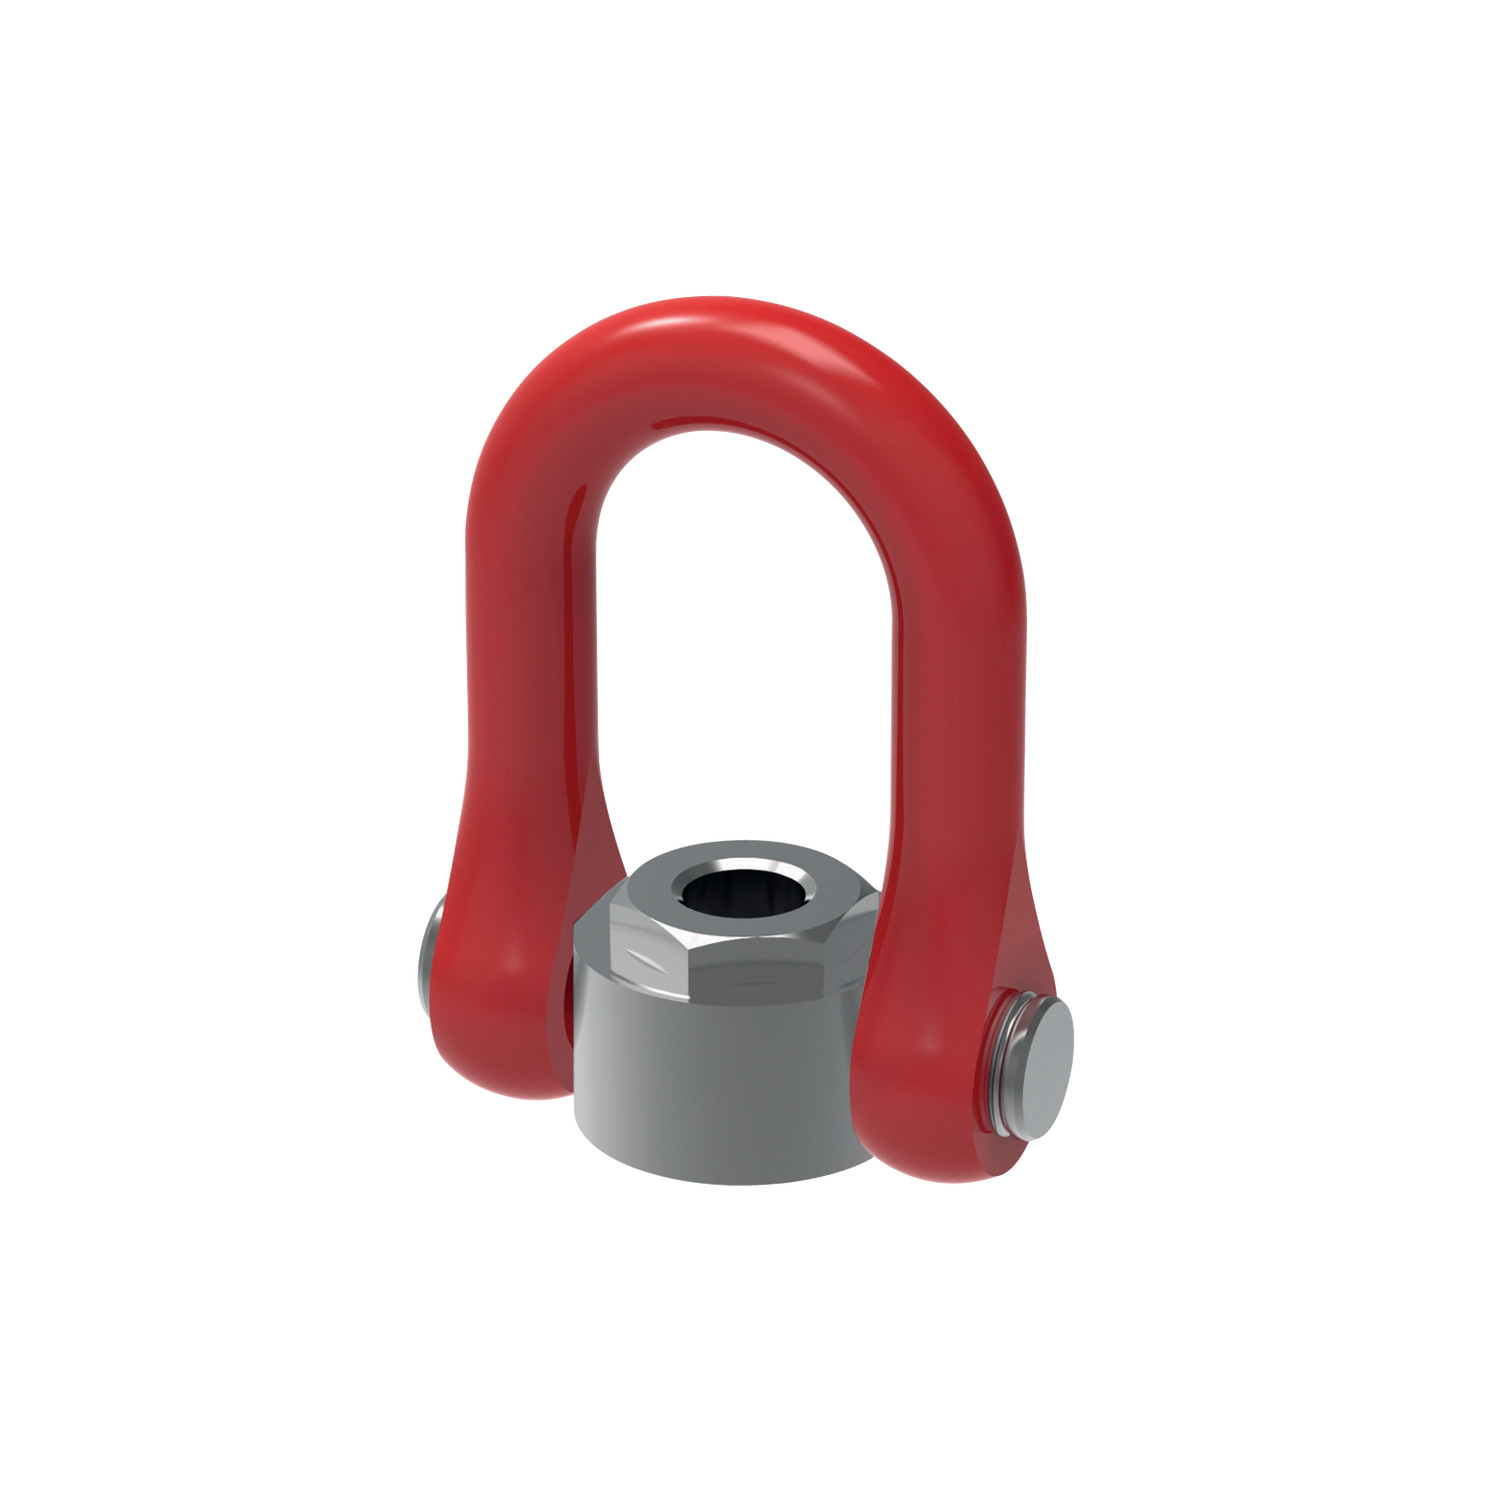 Double Swivel Shackle Nuts Female Double swivel shackle nuts with female threads. Available from M24 to M52 and up to UNC 2"-4 1/2. Capable of supporting loads of up to 89 tons.